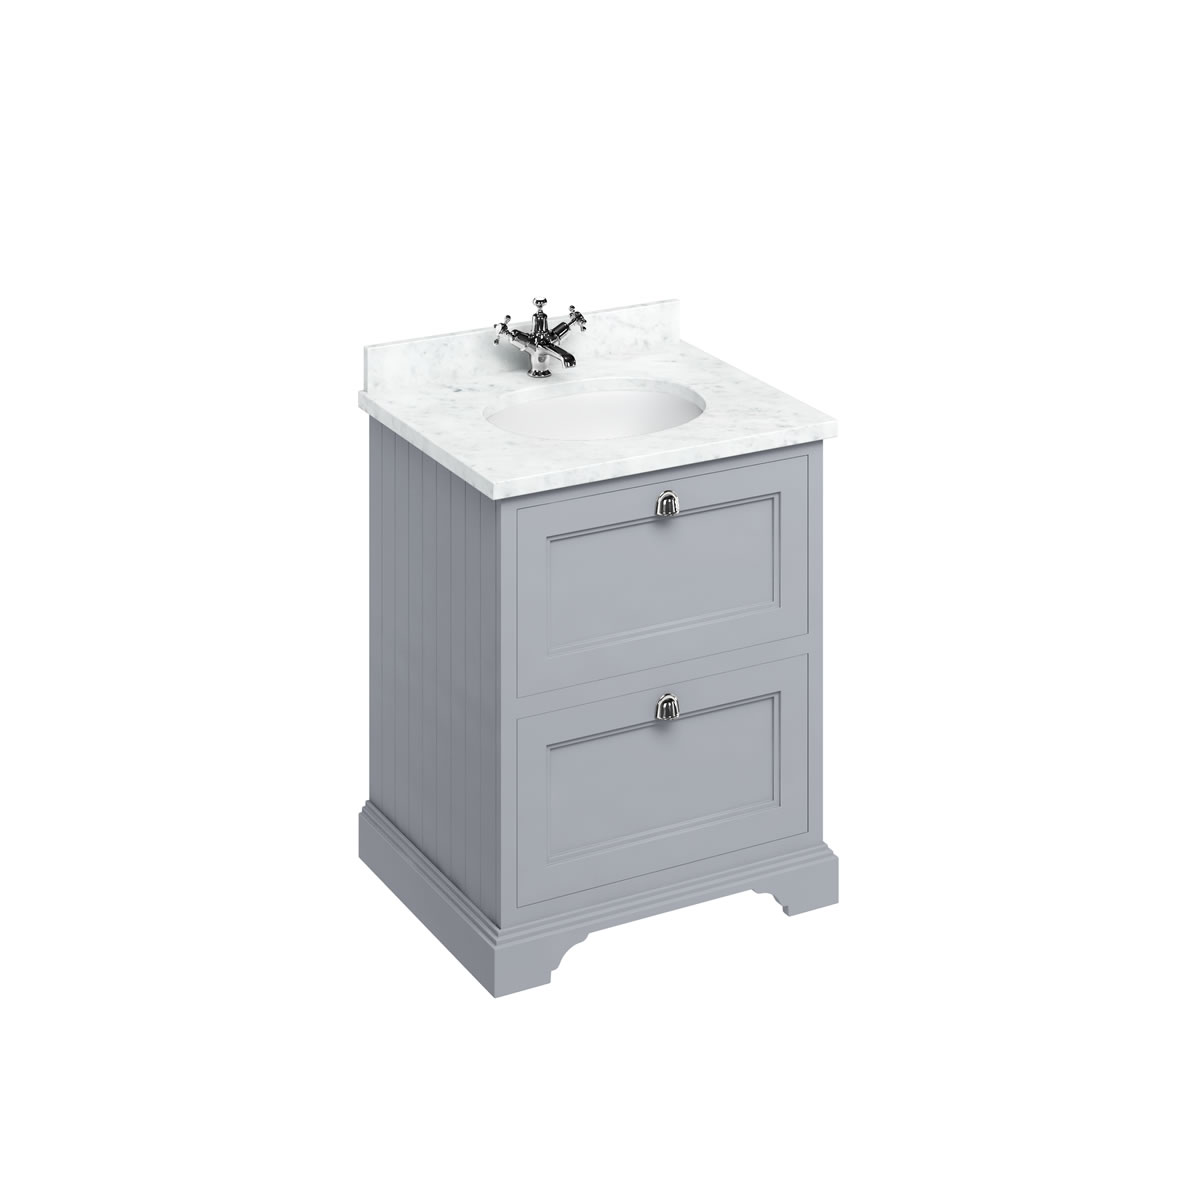 Freestanding 65 Vanity Unit with 2 drawers - Classic Grey and Minerva Carrara white worktop with integrated white basin 